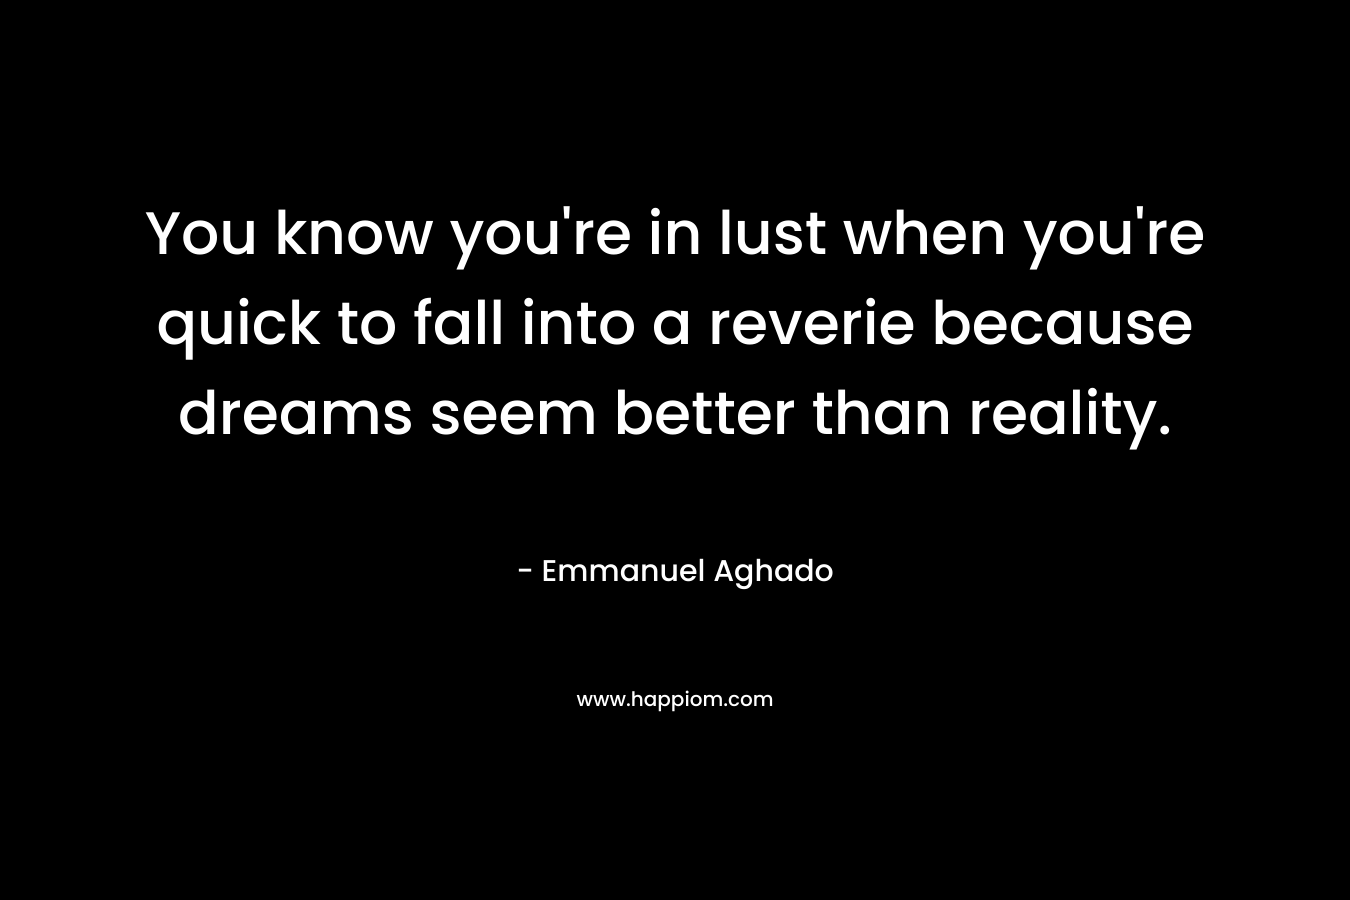 You know you’re in lust when you’re quick to fall into a reverie because dreams seem better than reality. – Emmanuel Aghado